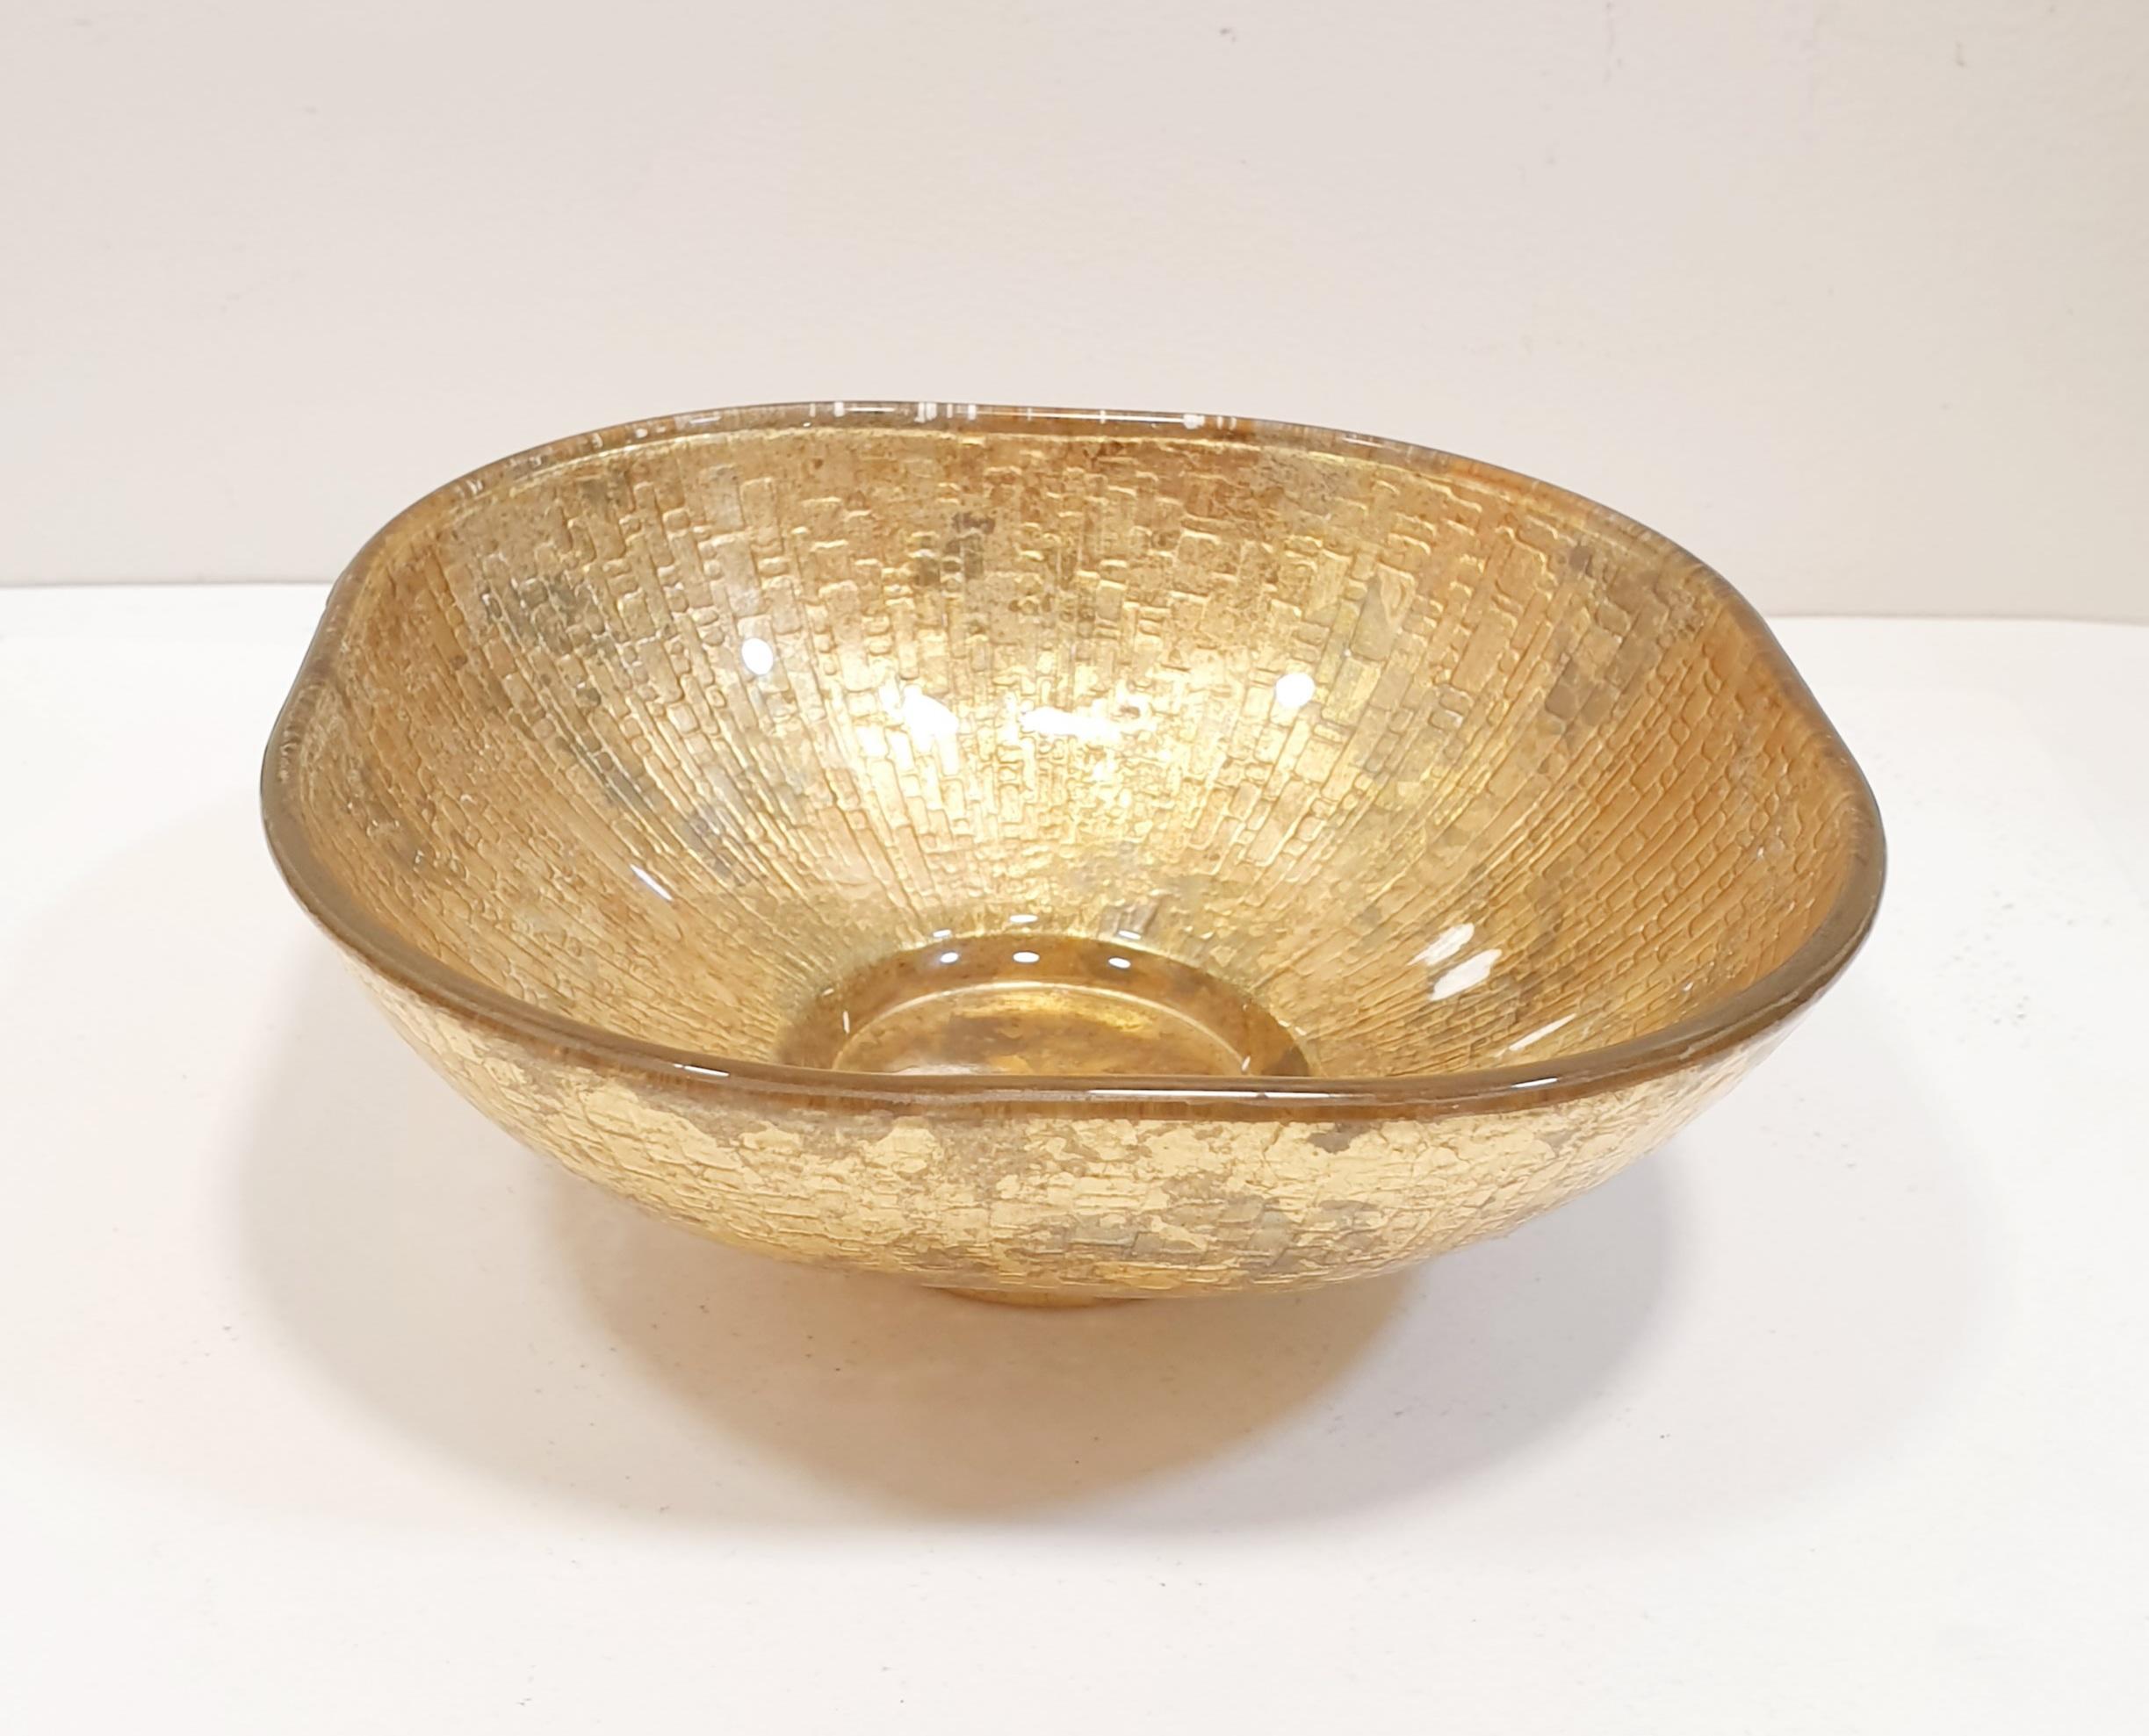 Vintage signed Lesley Roy designs gold leaf square bowl-crackled gold candy bowl

A vintage Lesley Roy Designs Collection square bowl. Done in her signature crackled gold leaf. The bowl is made of glass and real gold leaf. Her pieces are all